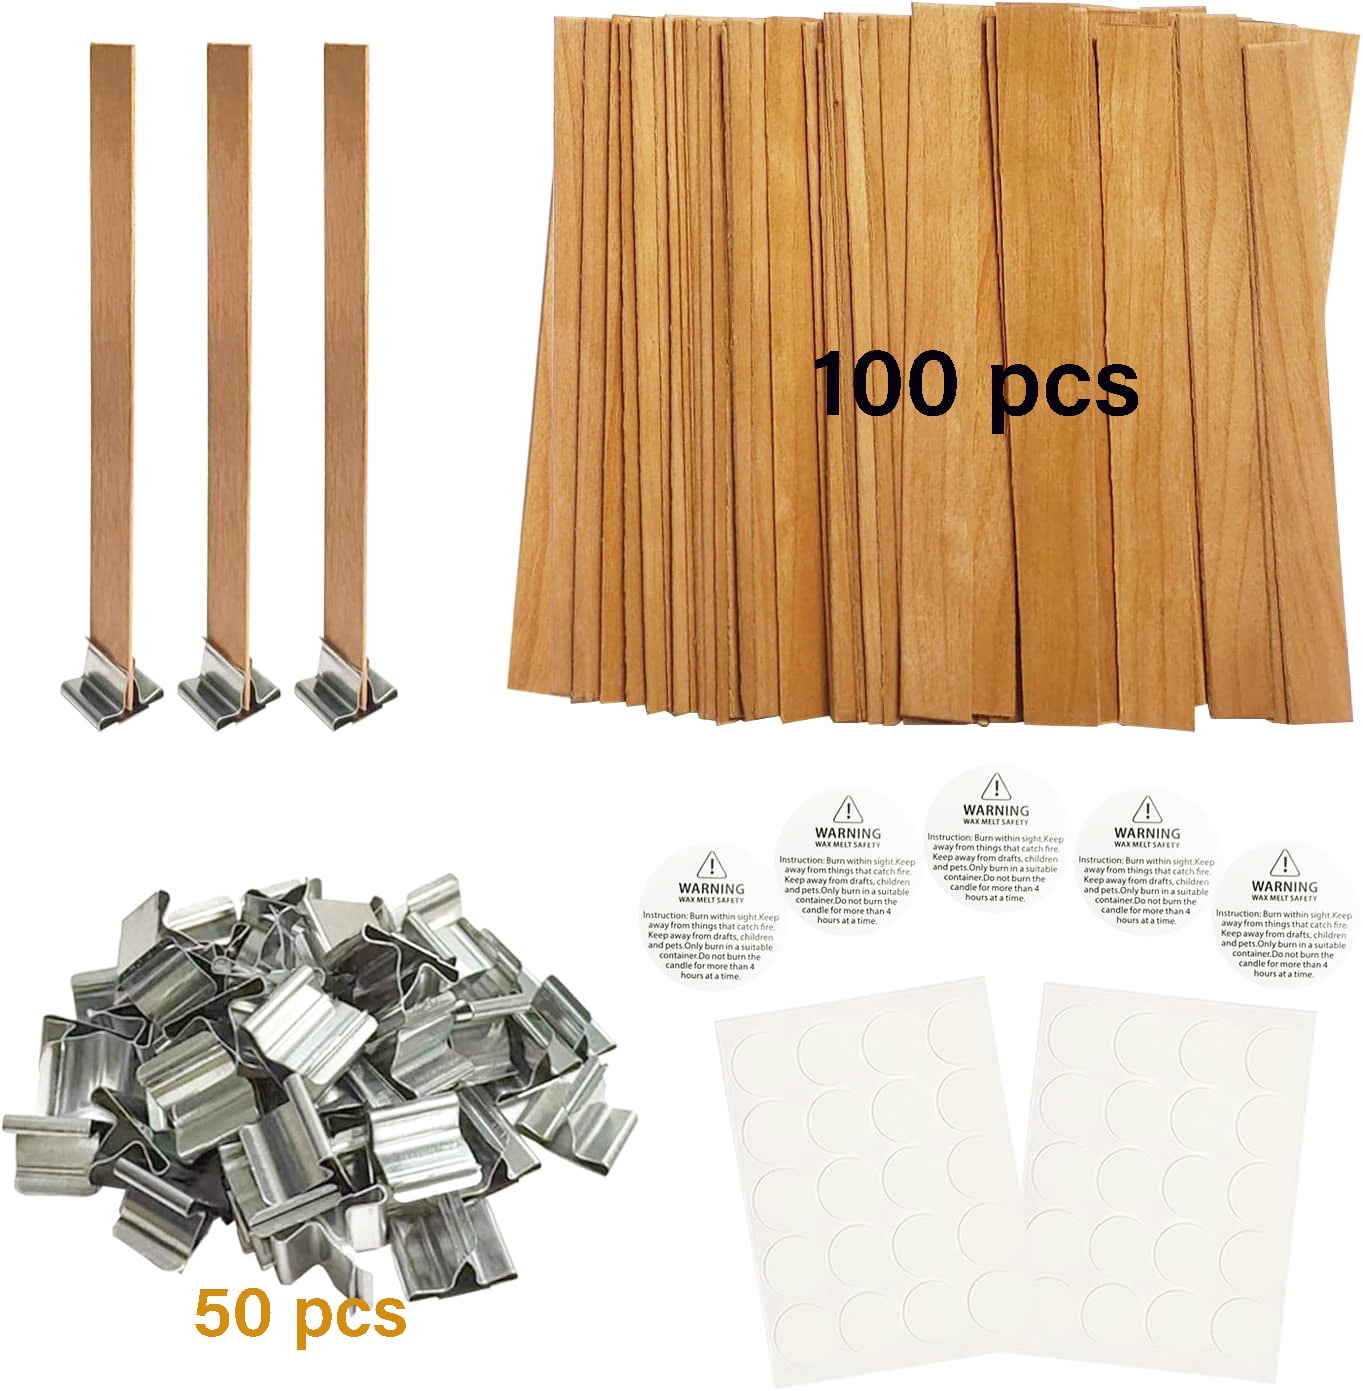 Wood Wicks For Candles, Wooden Wicks With Wick Trimmer Cutter, Wood Wick  Candle Making Kit For DIY Candle Making Easy Install